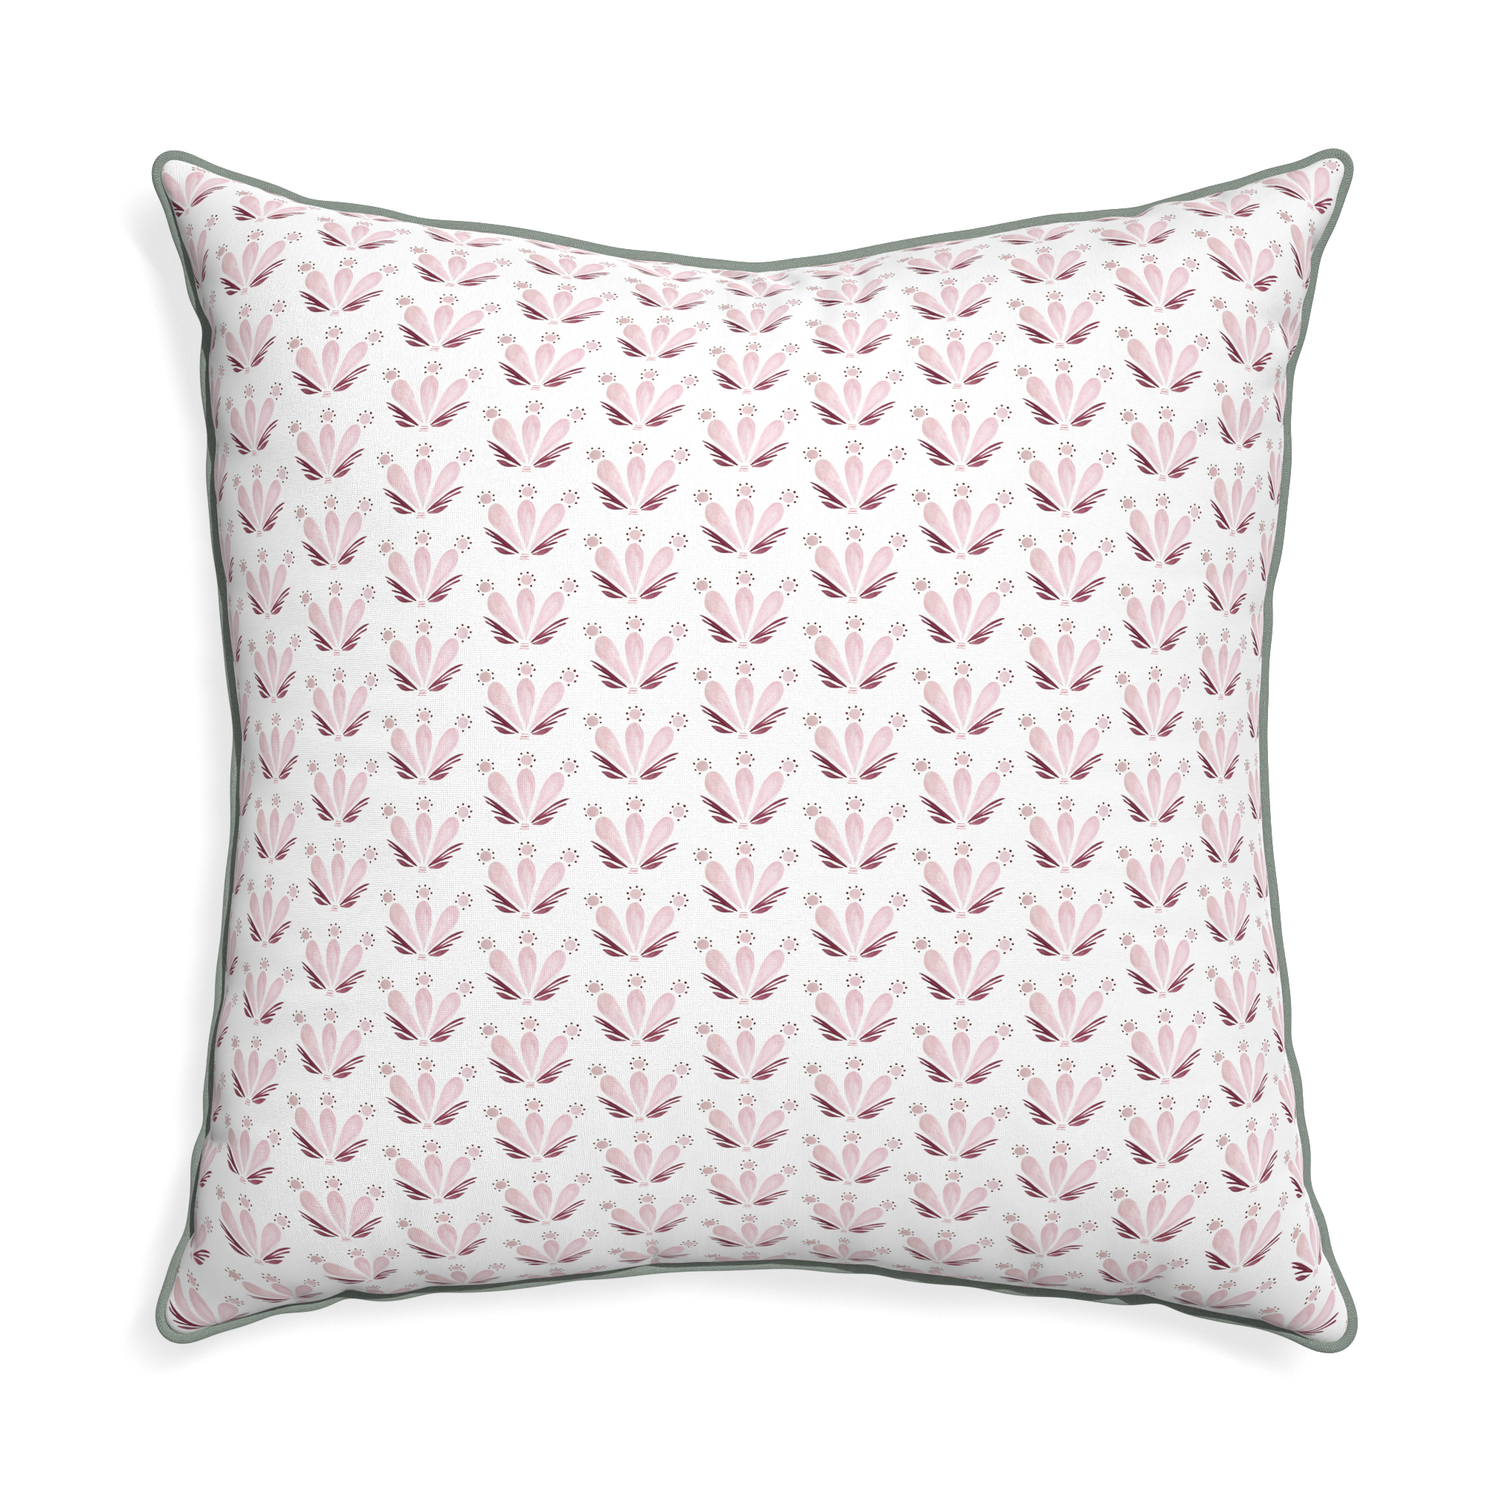 Euro-sham serena pink custom pink & burgundy drop repeat floralpillow with sage piping on white background